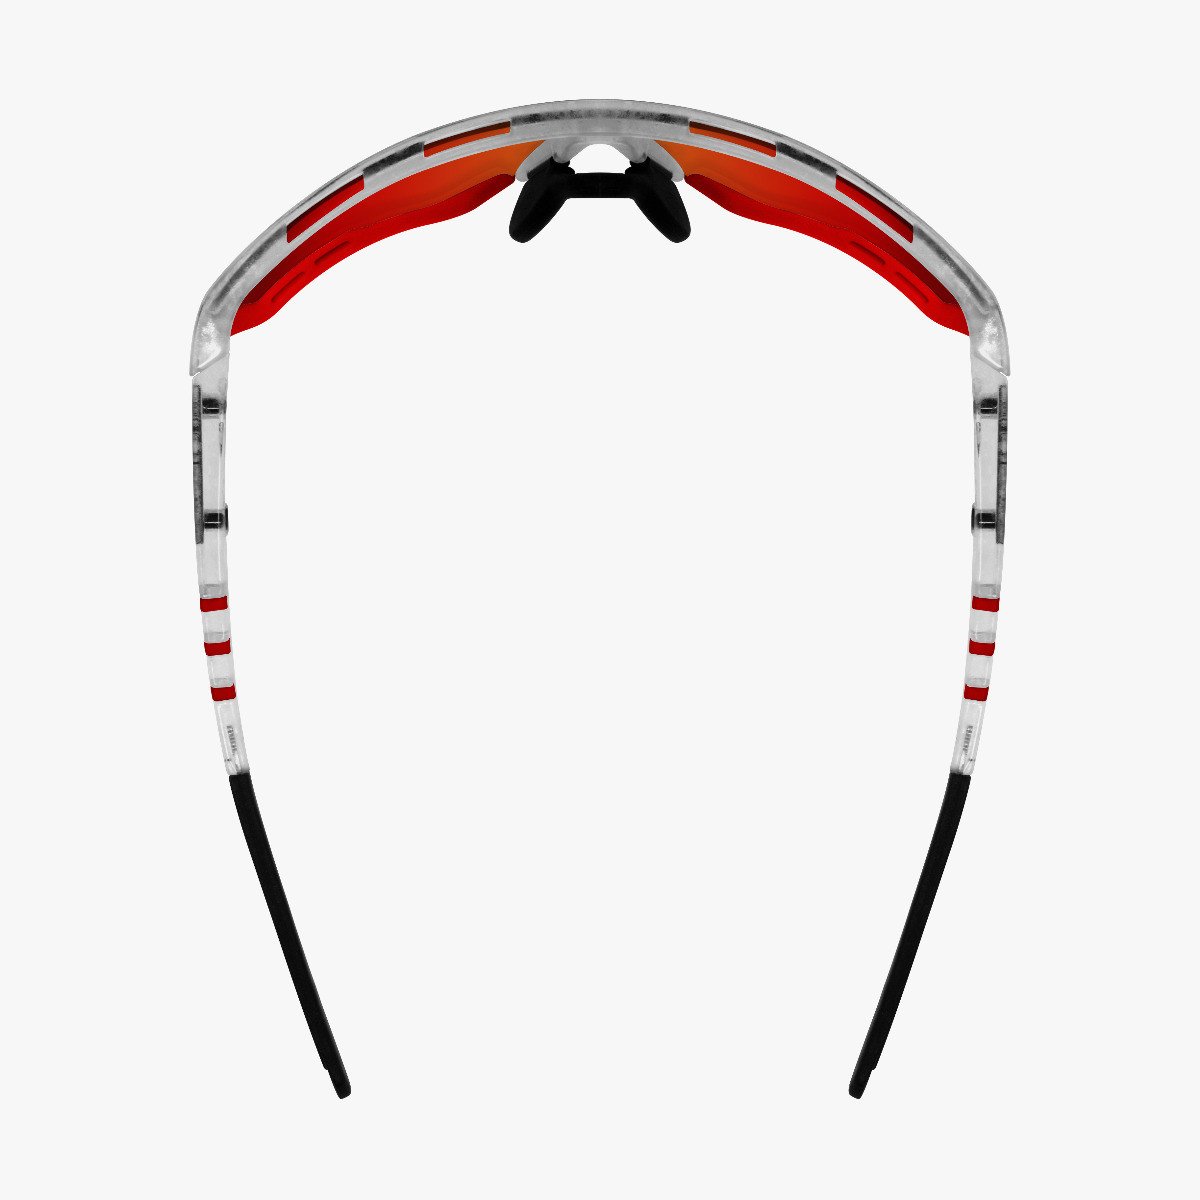 Aerocomfort cycling sunglasses scnxt photochromic frozen frame red lenses EY19160503
